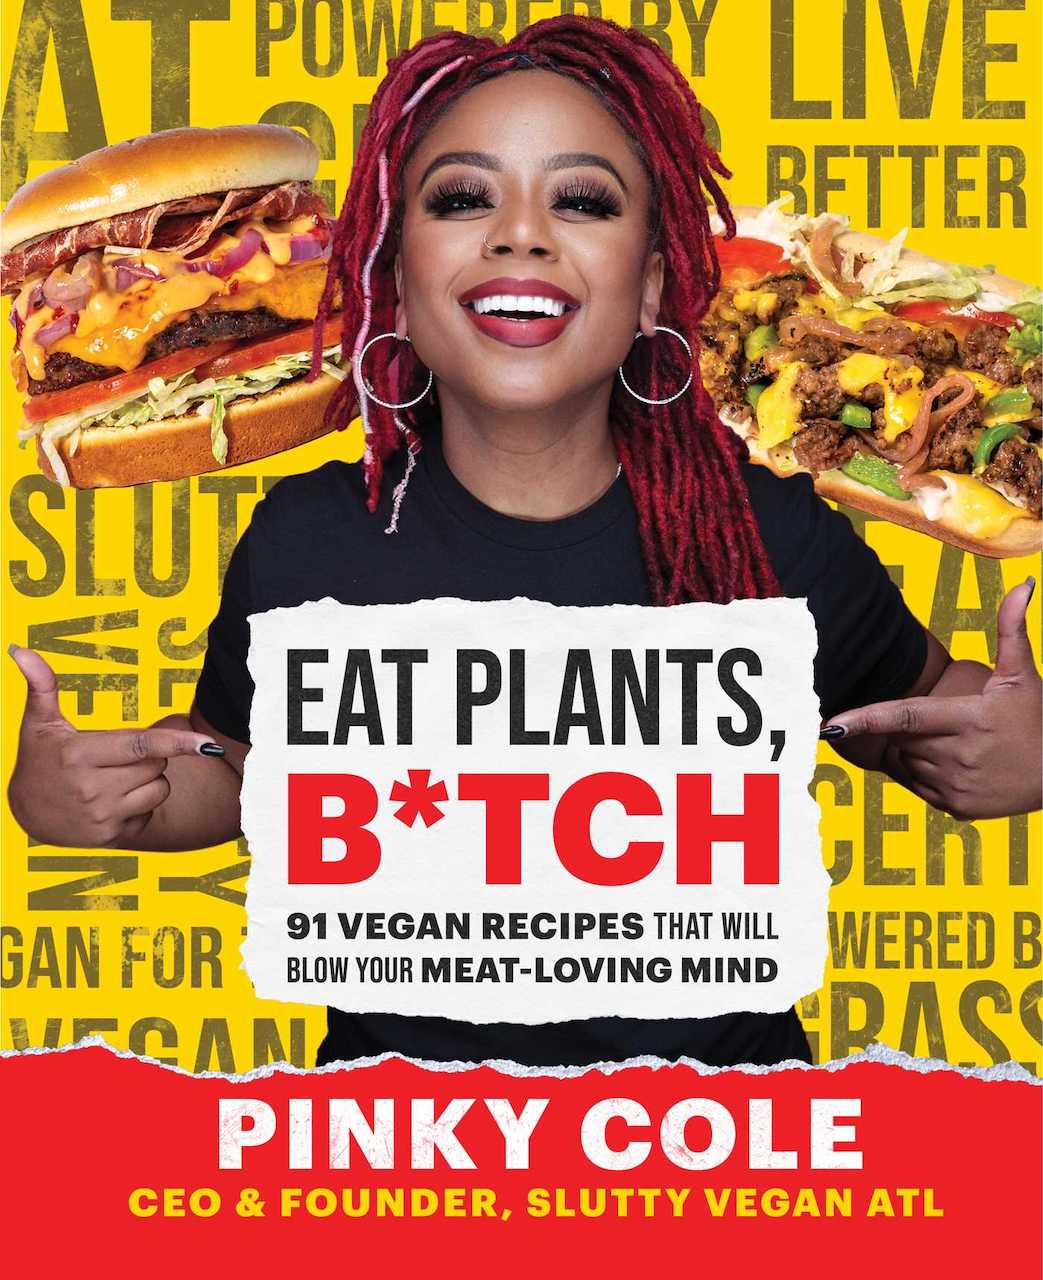 Cover of Eat Plants, B*tch: 91 Vegan Recipes that will Blow Your Meat-Loving Mind from Pinky Cole, the CEO & Founder of Slutty Vegan